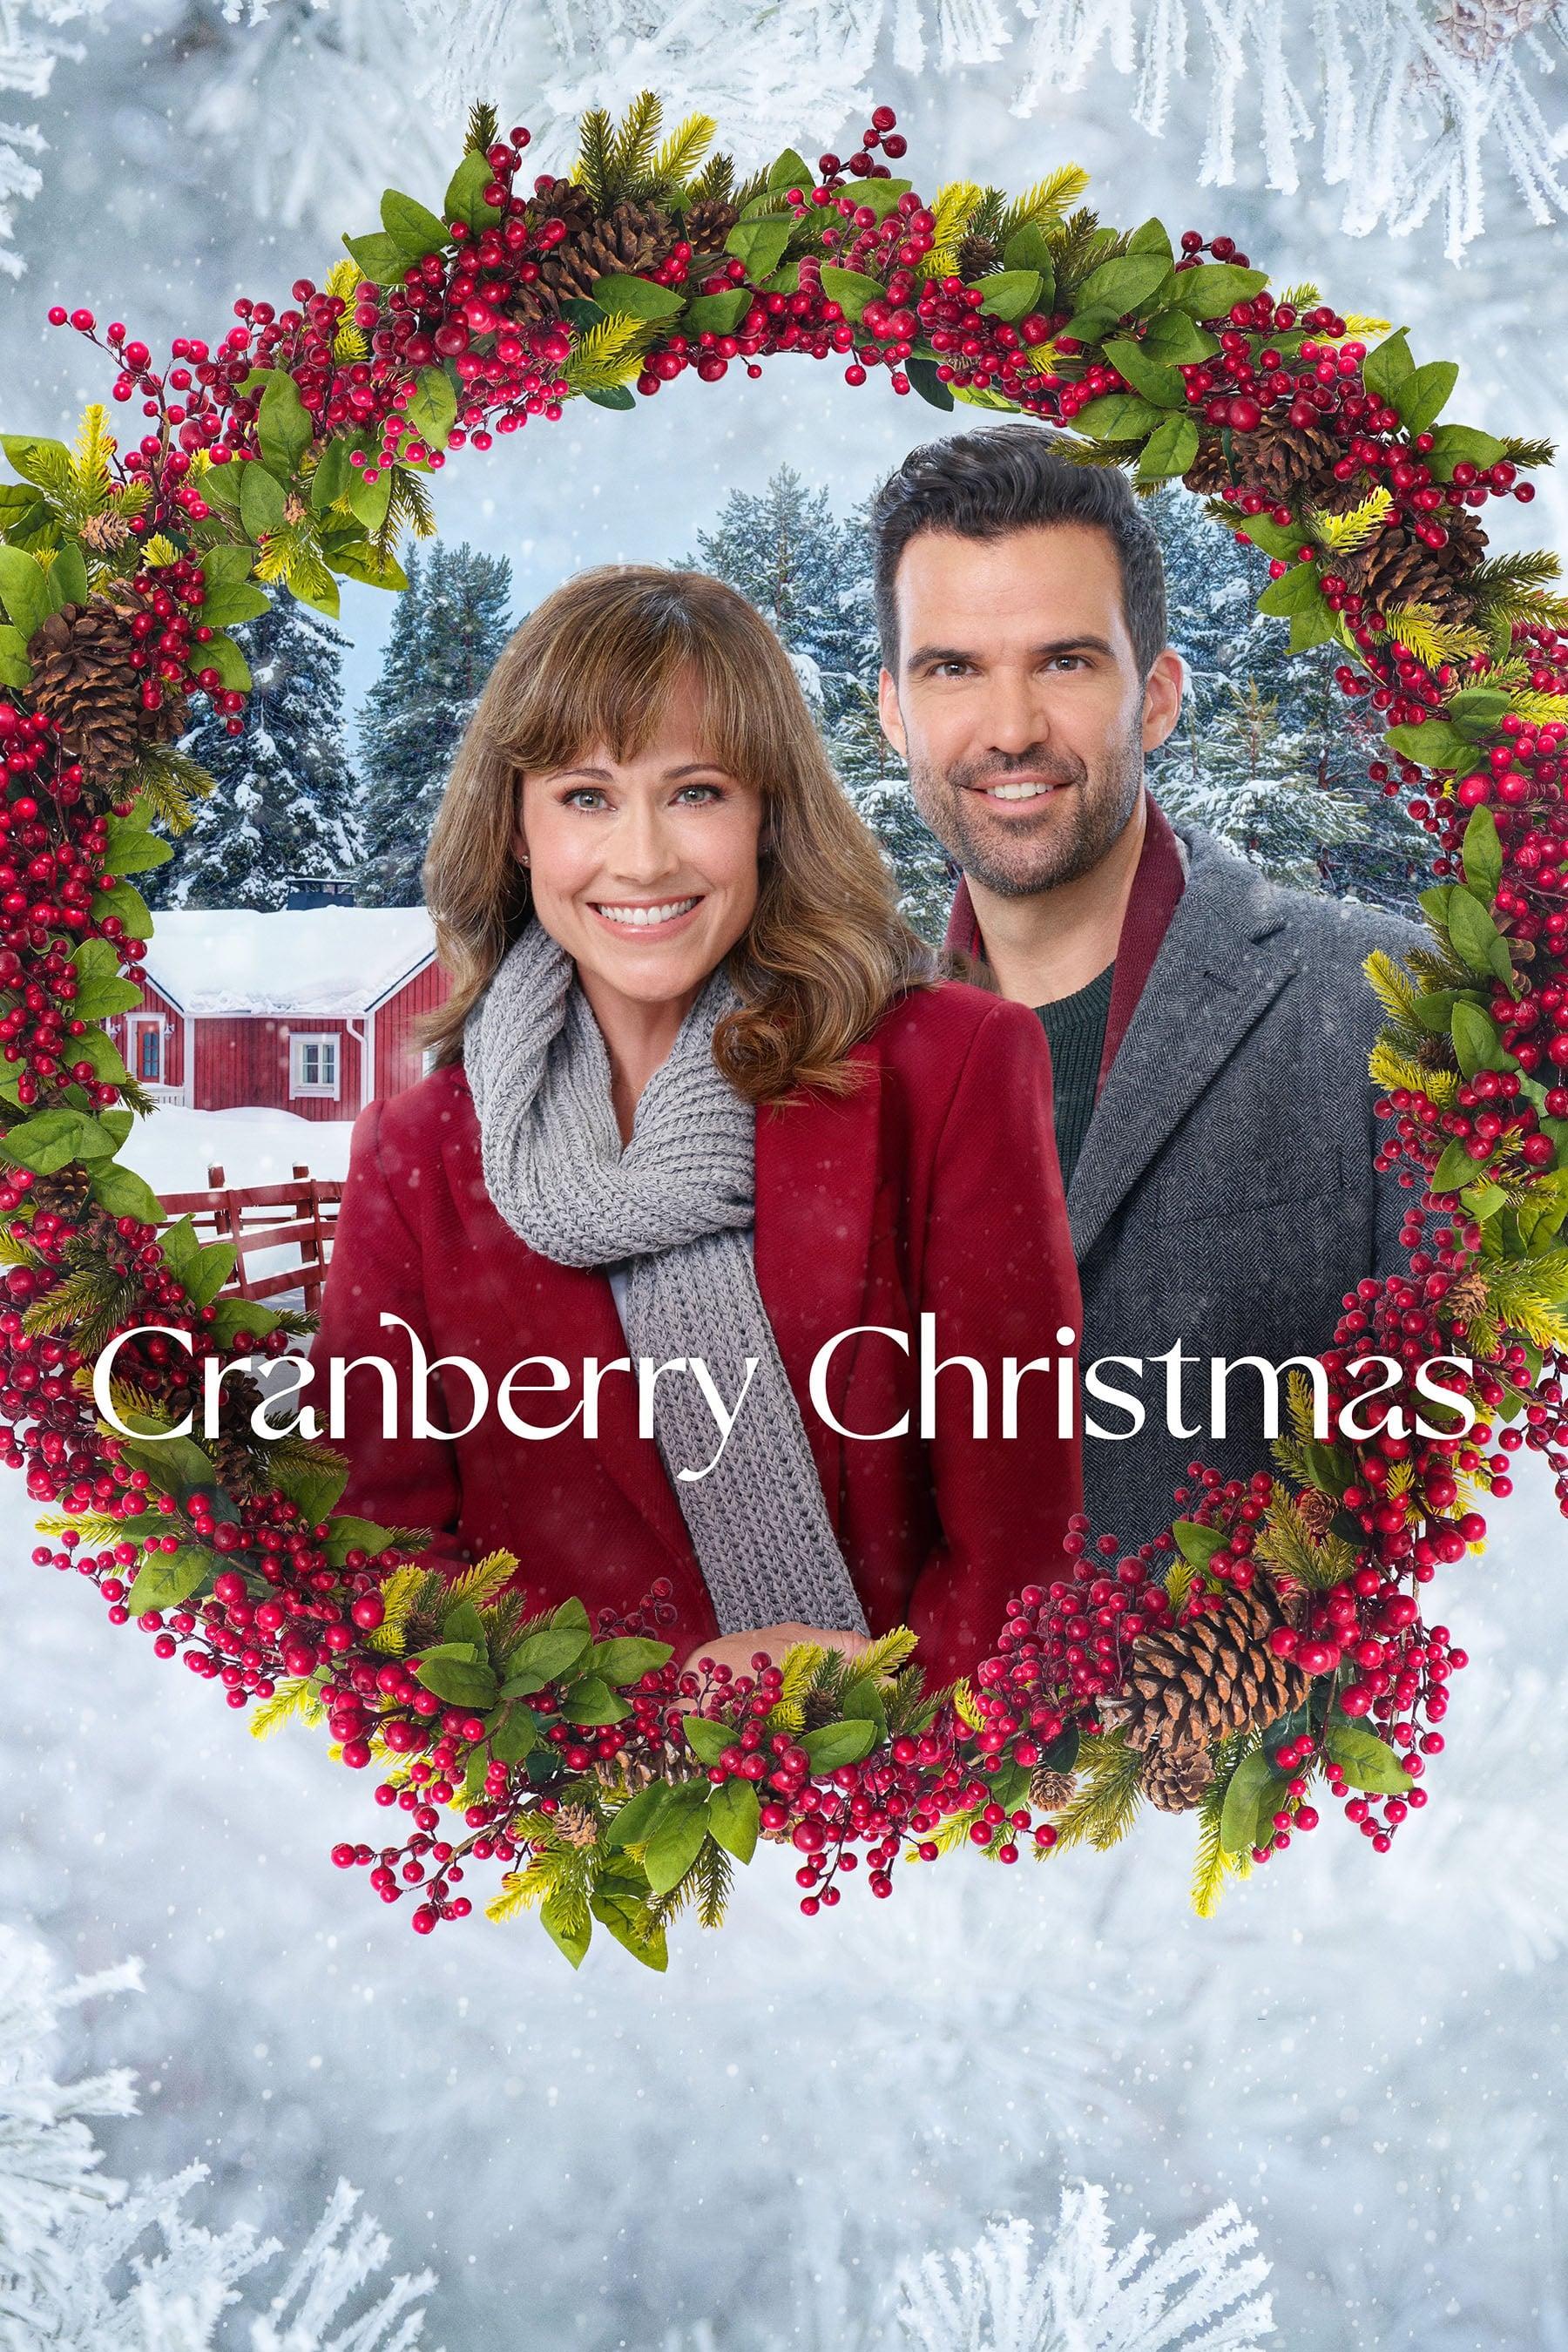 Cranberry Christmas poster